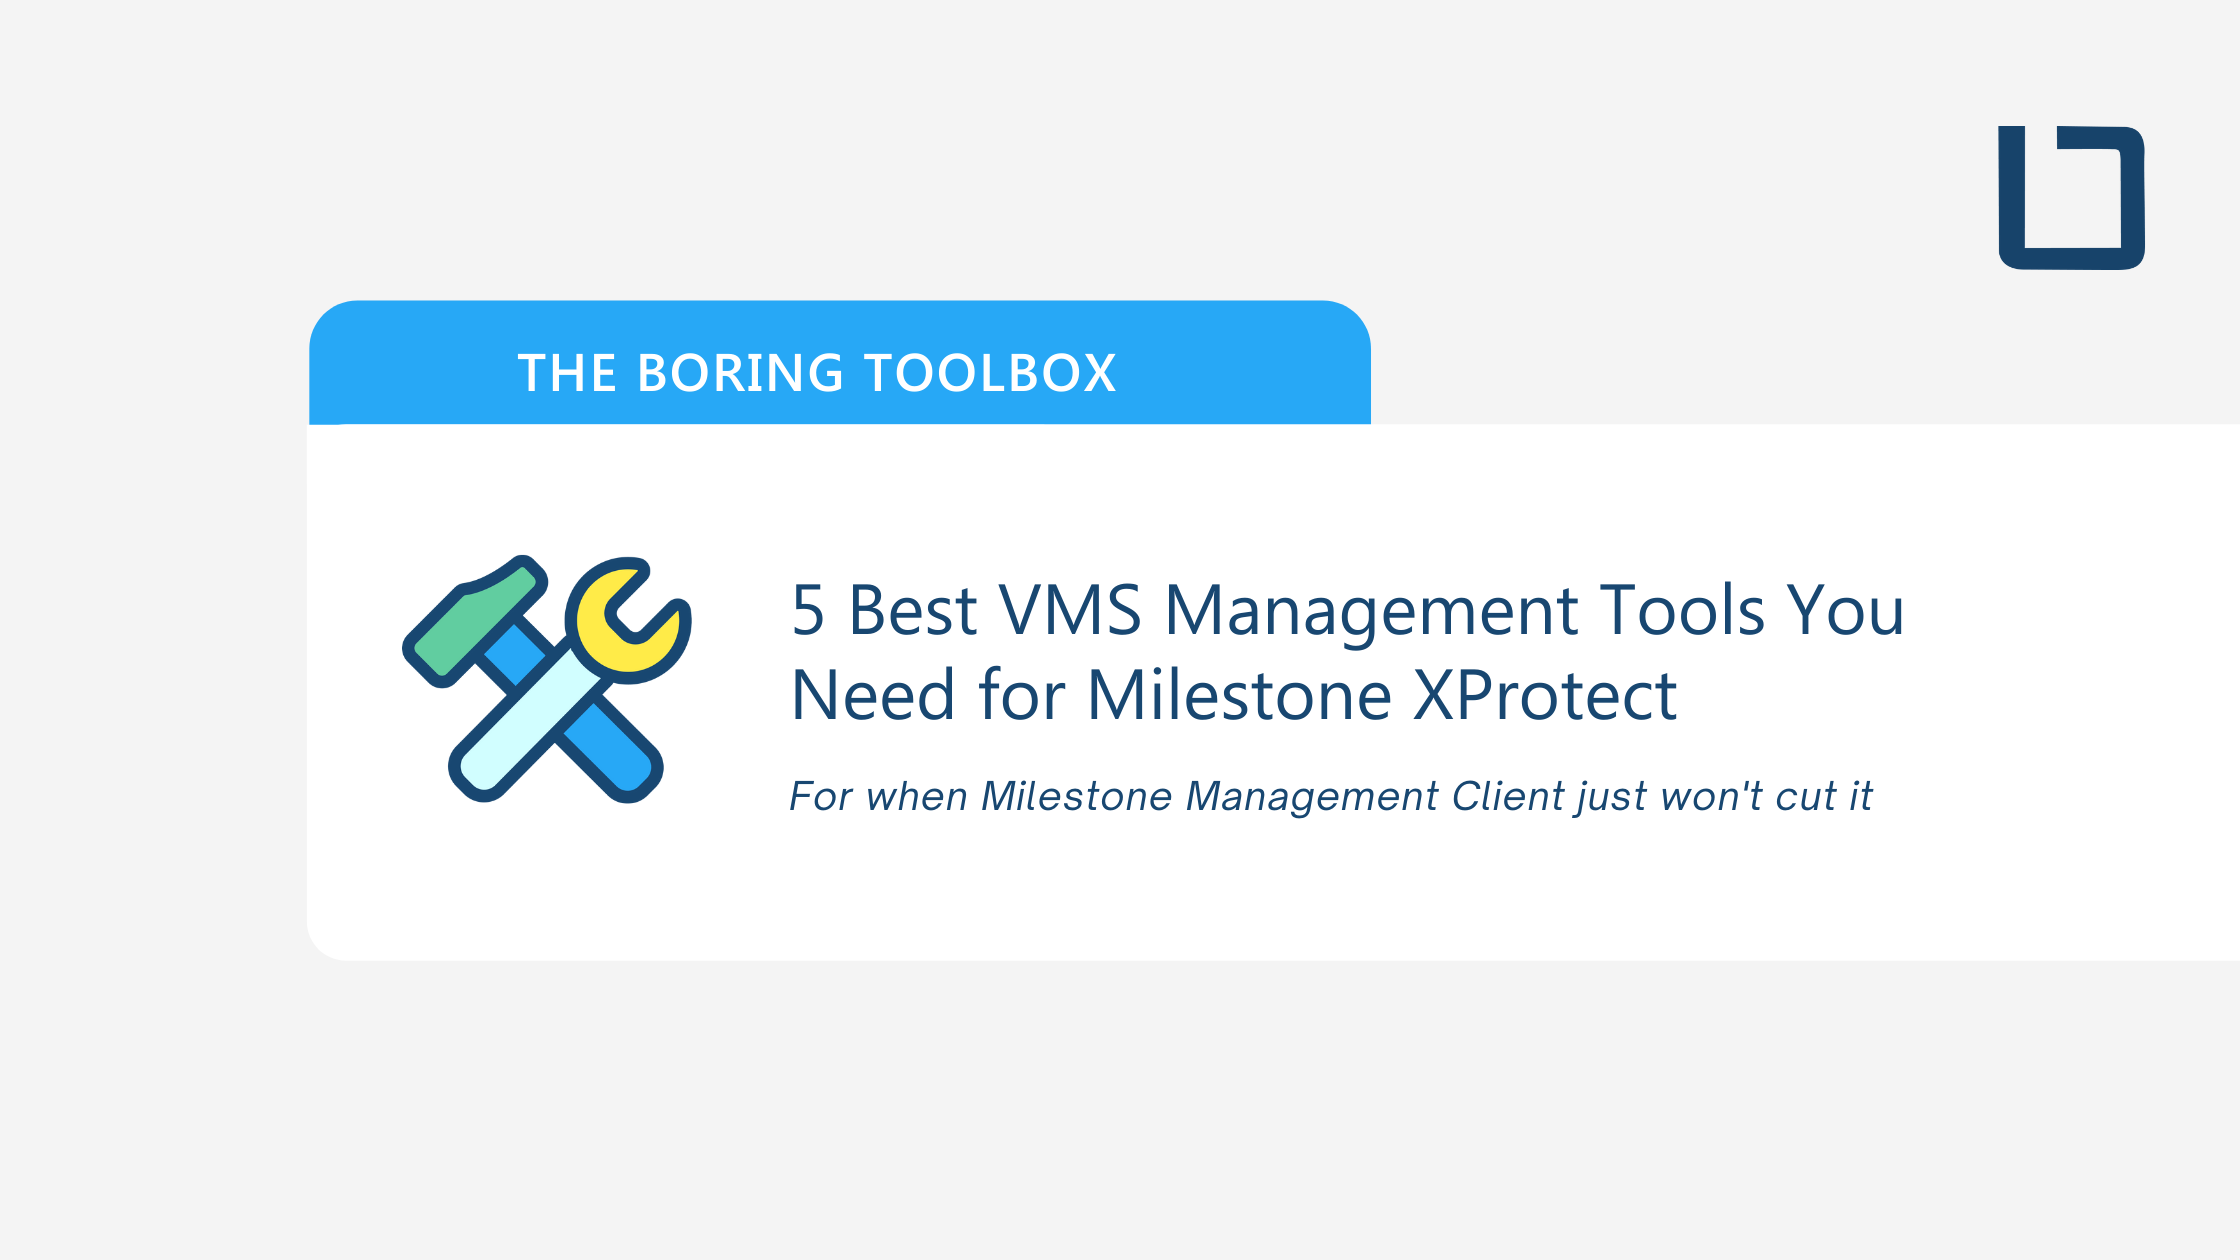 5 VMS Management Add-Ons You Need for Milestone Management